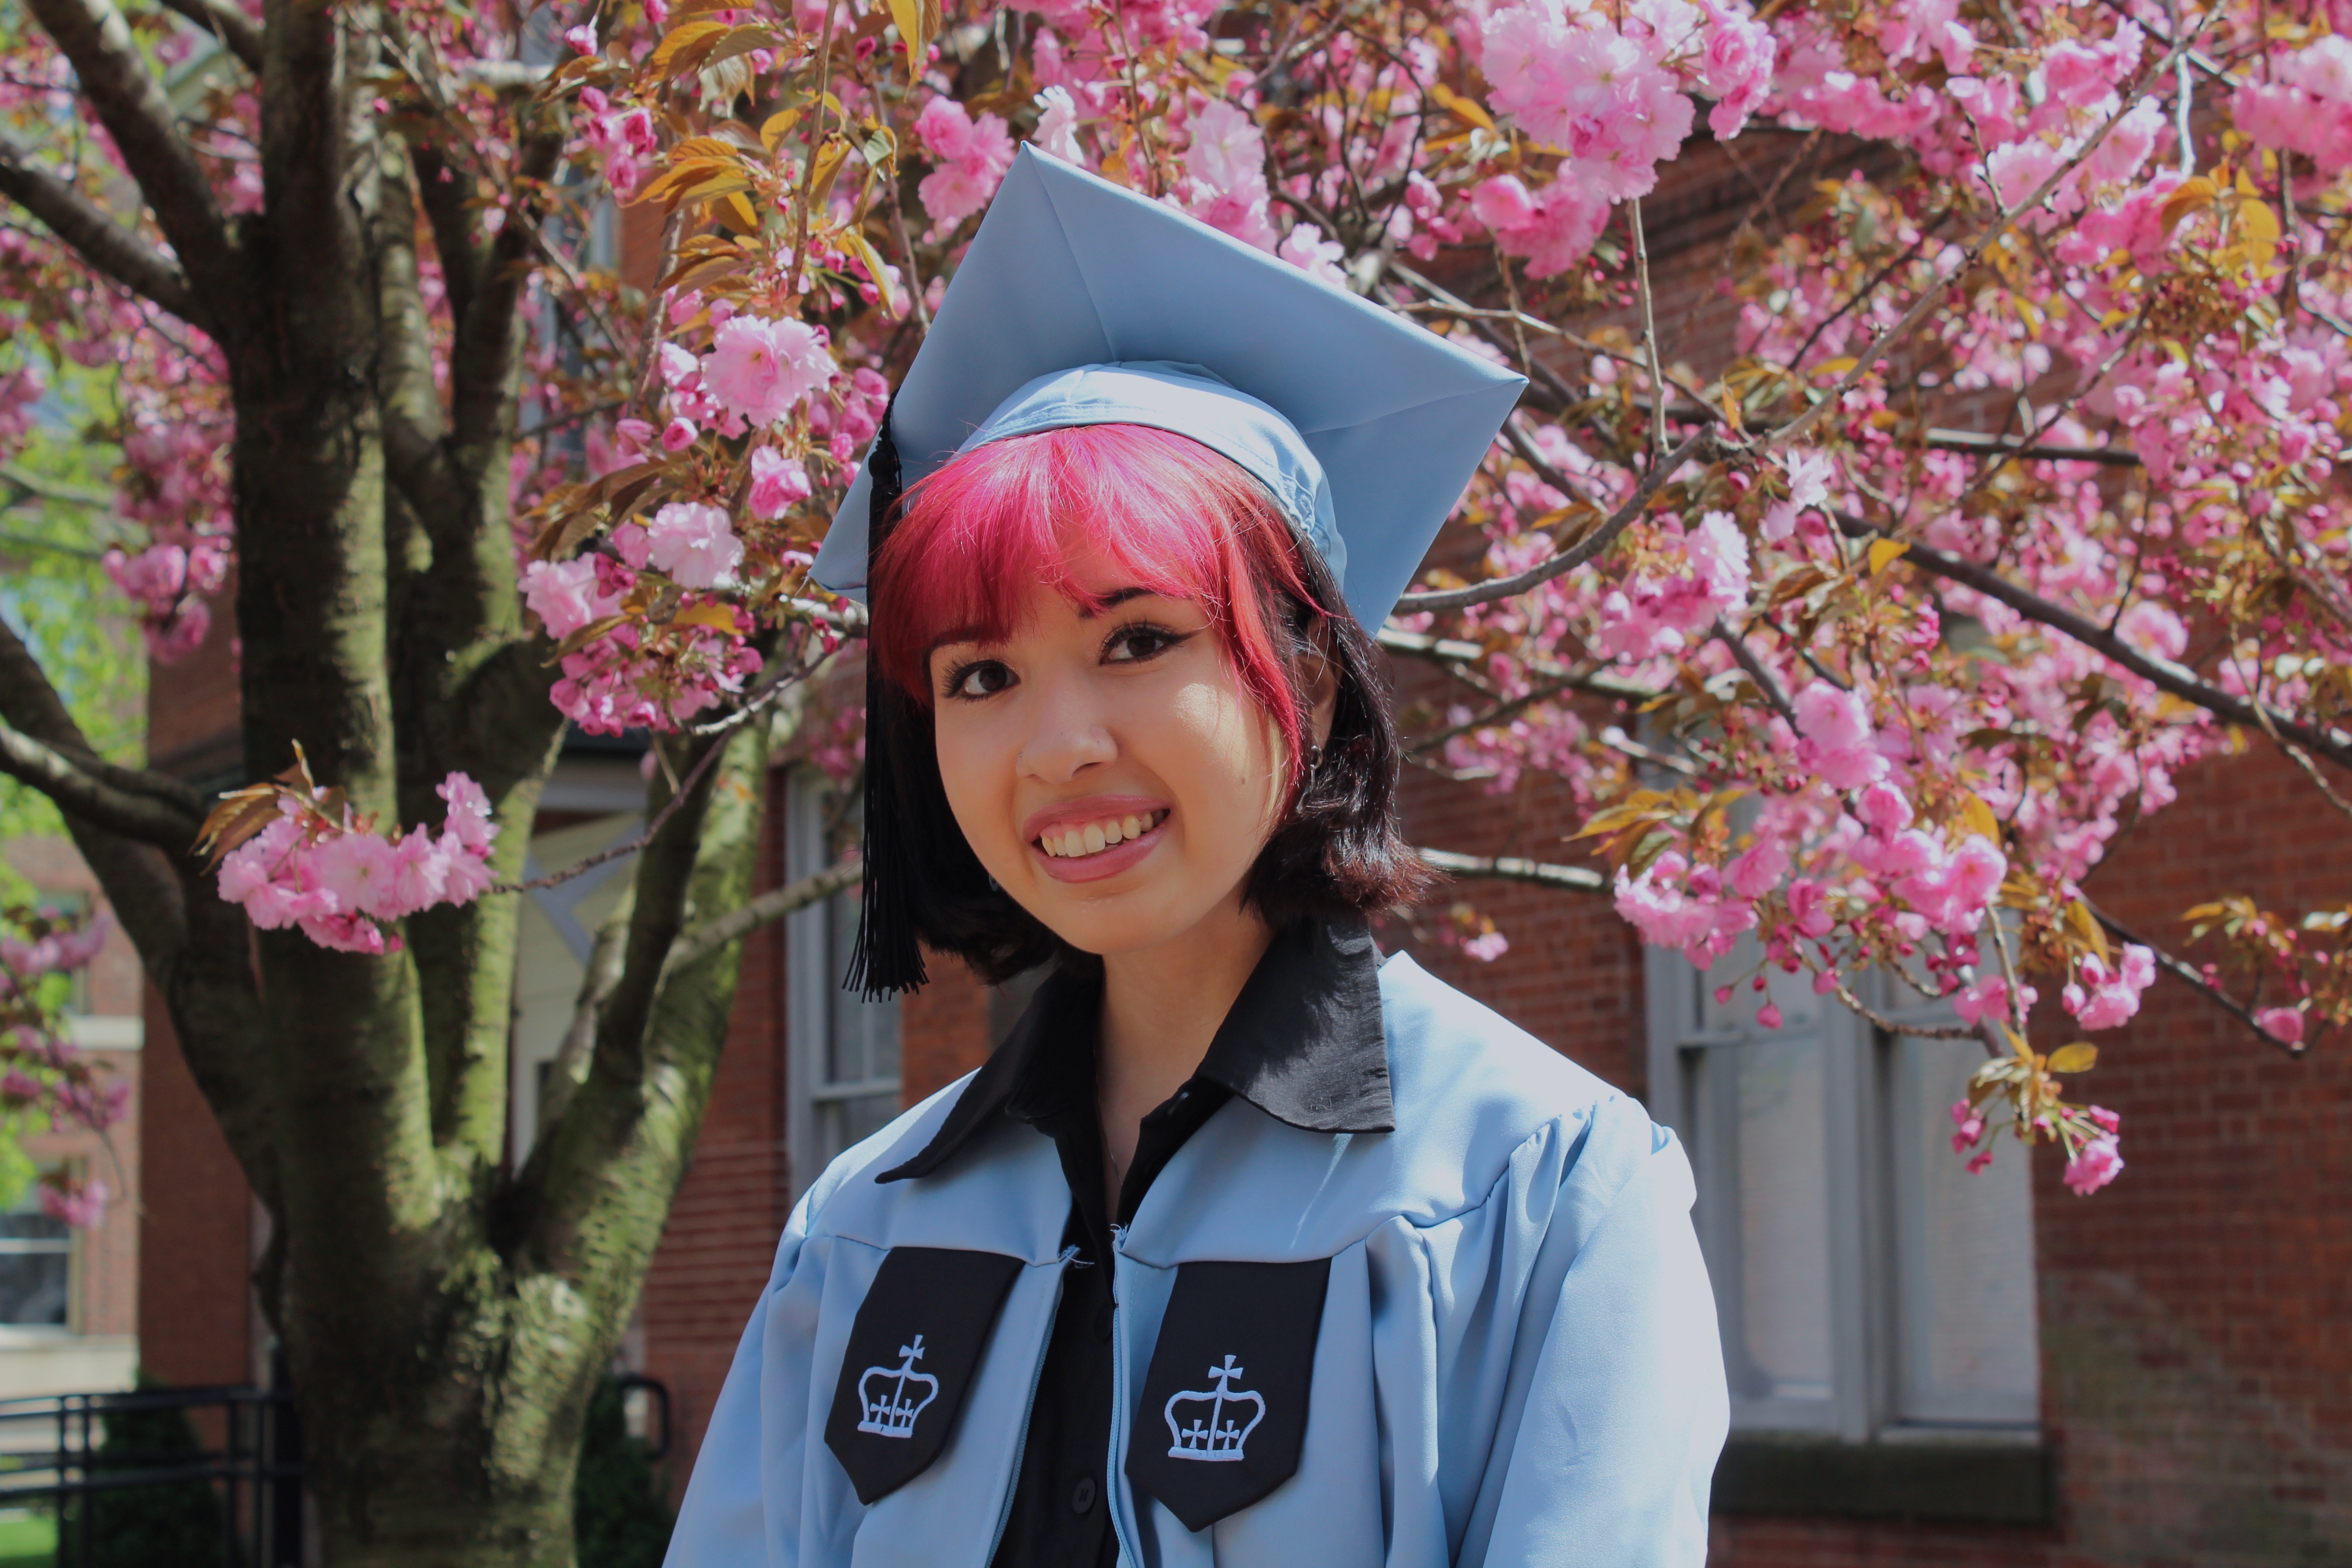 Barbara posing in front of a magnolia tree in her cap and gown